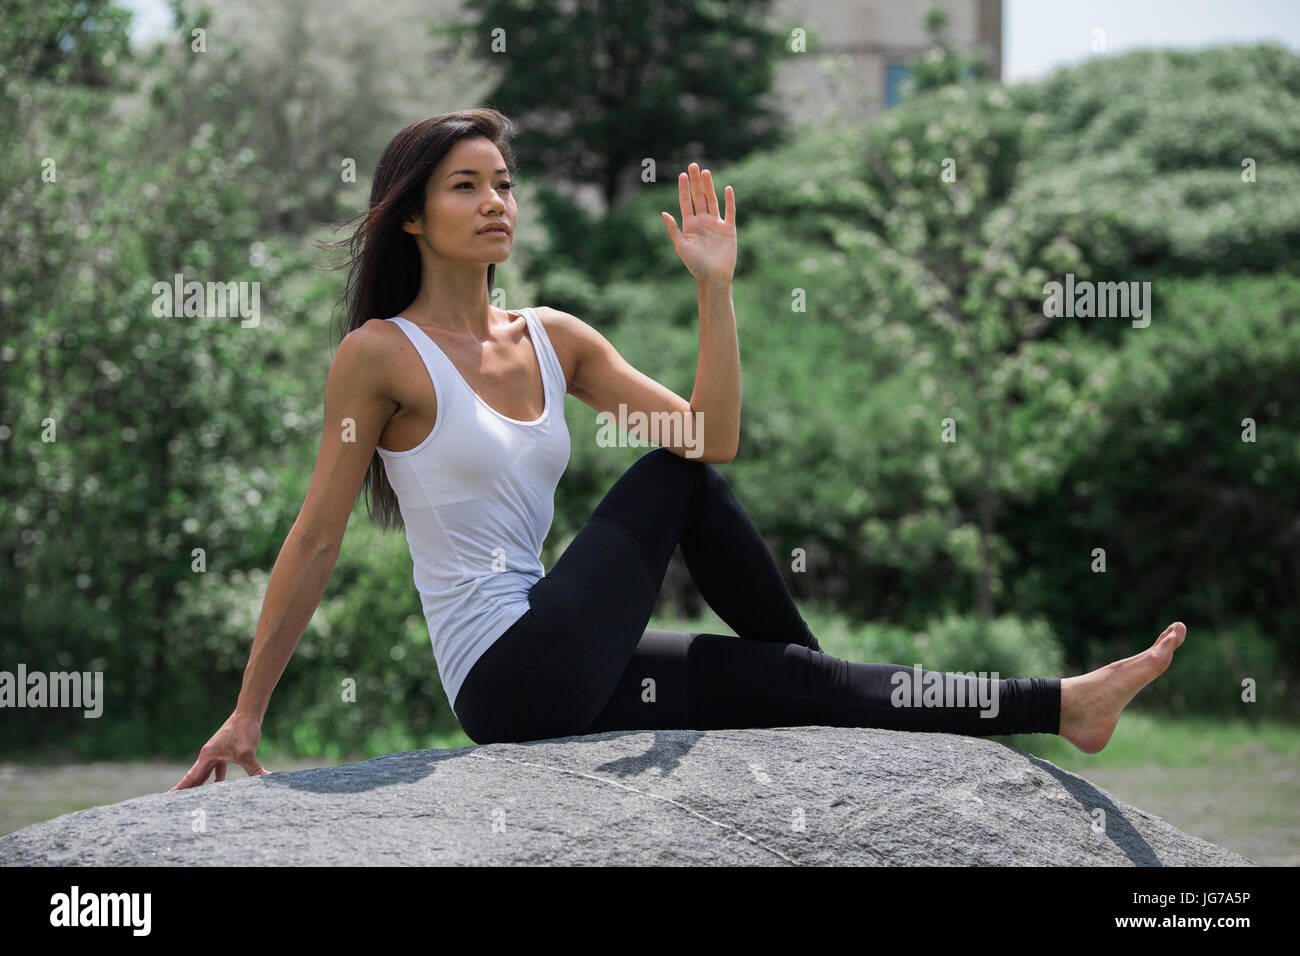 A beautiful young asian woman stretching, exercising and doing yoga outdoor in a park Stock Photo